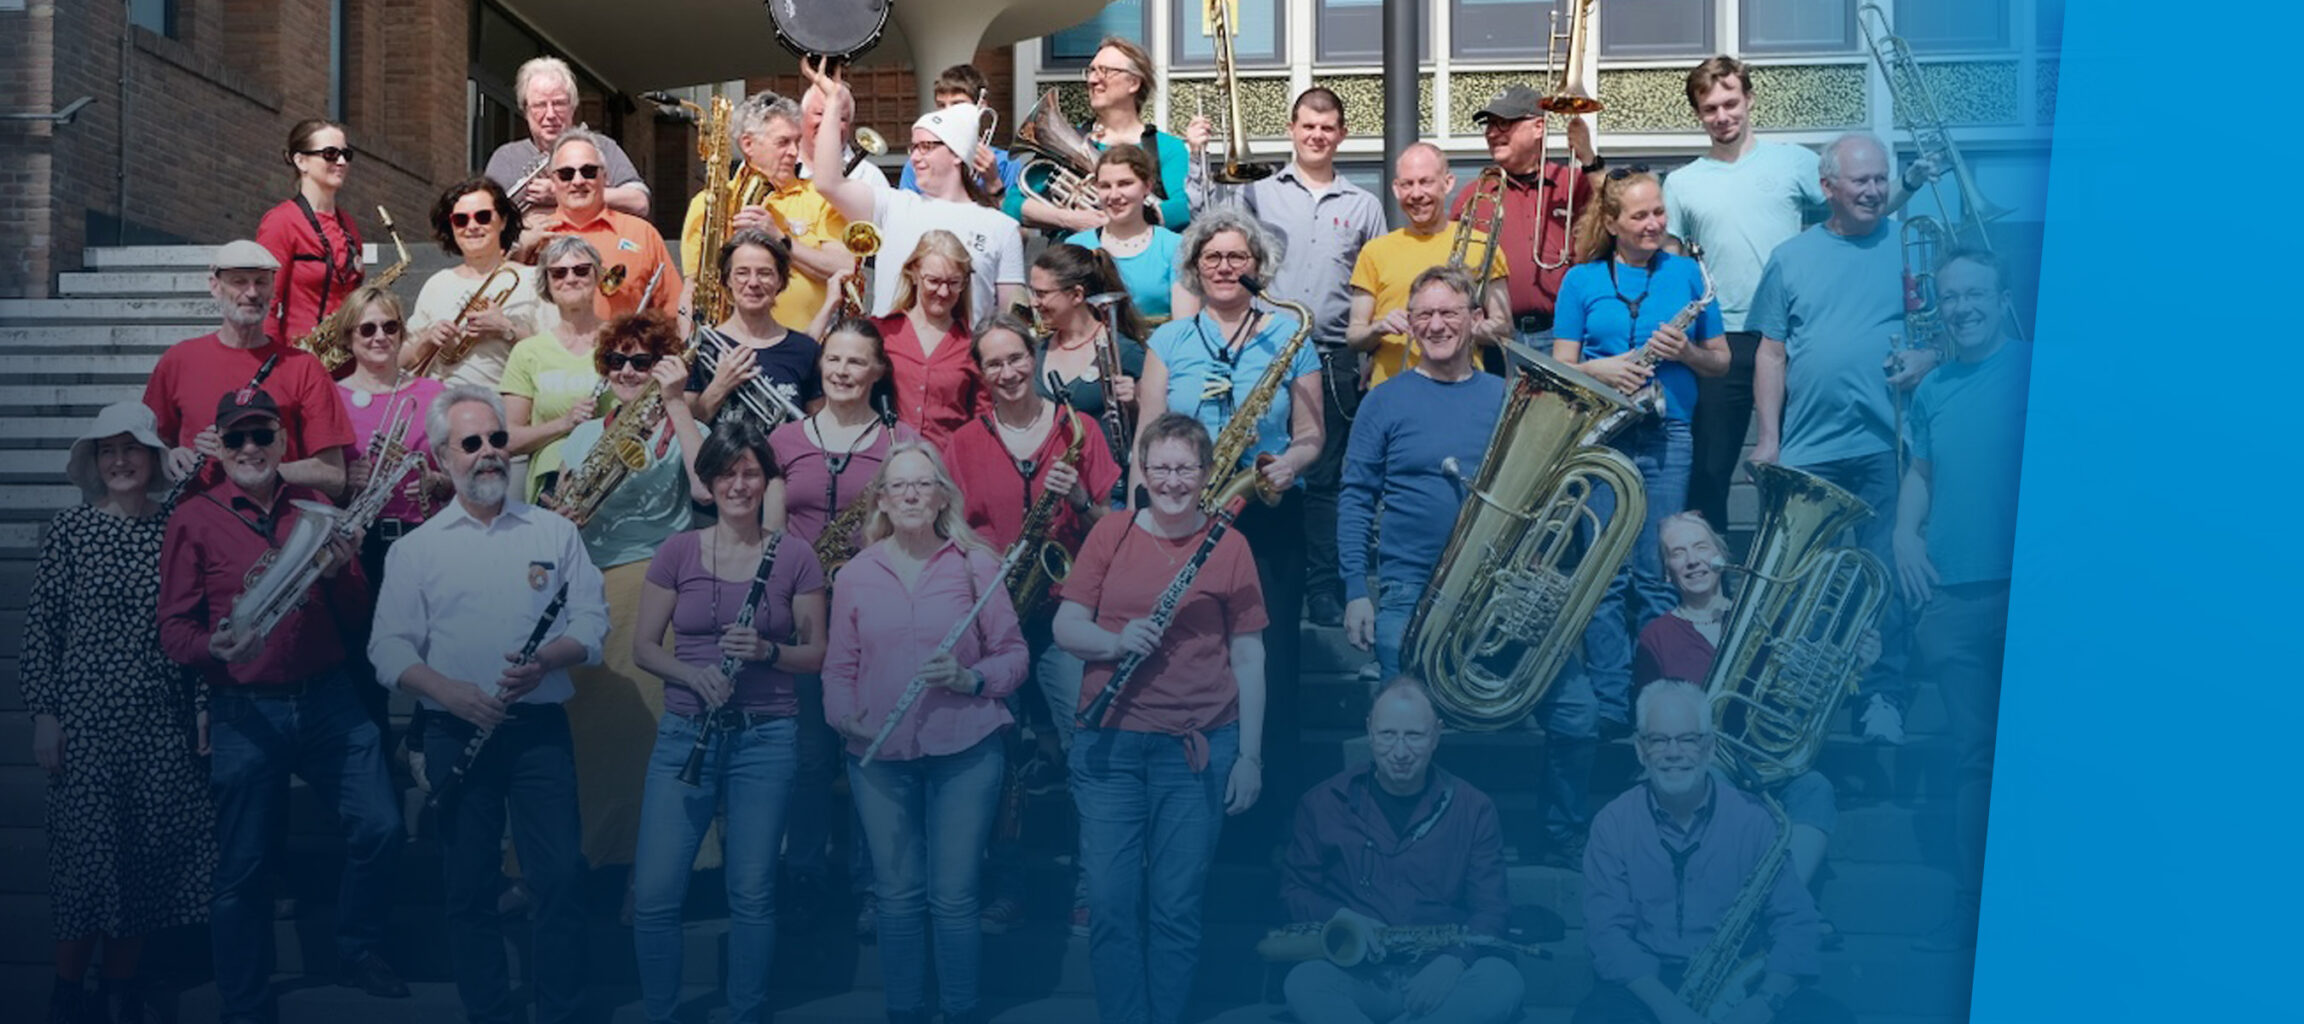 Orchestra for diversity – Orchester der Vielfalt - supported by WE AID